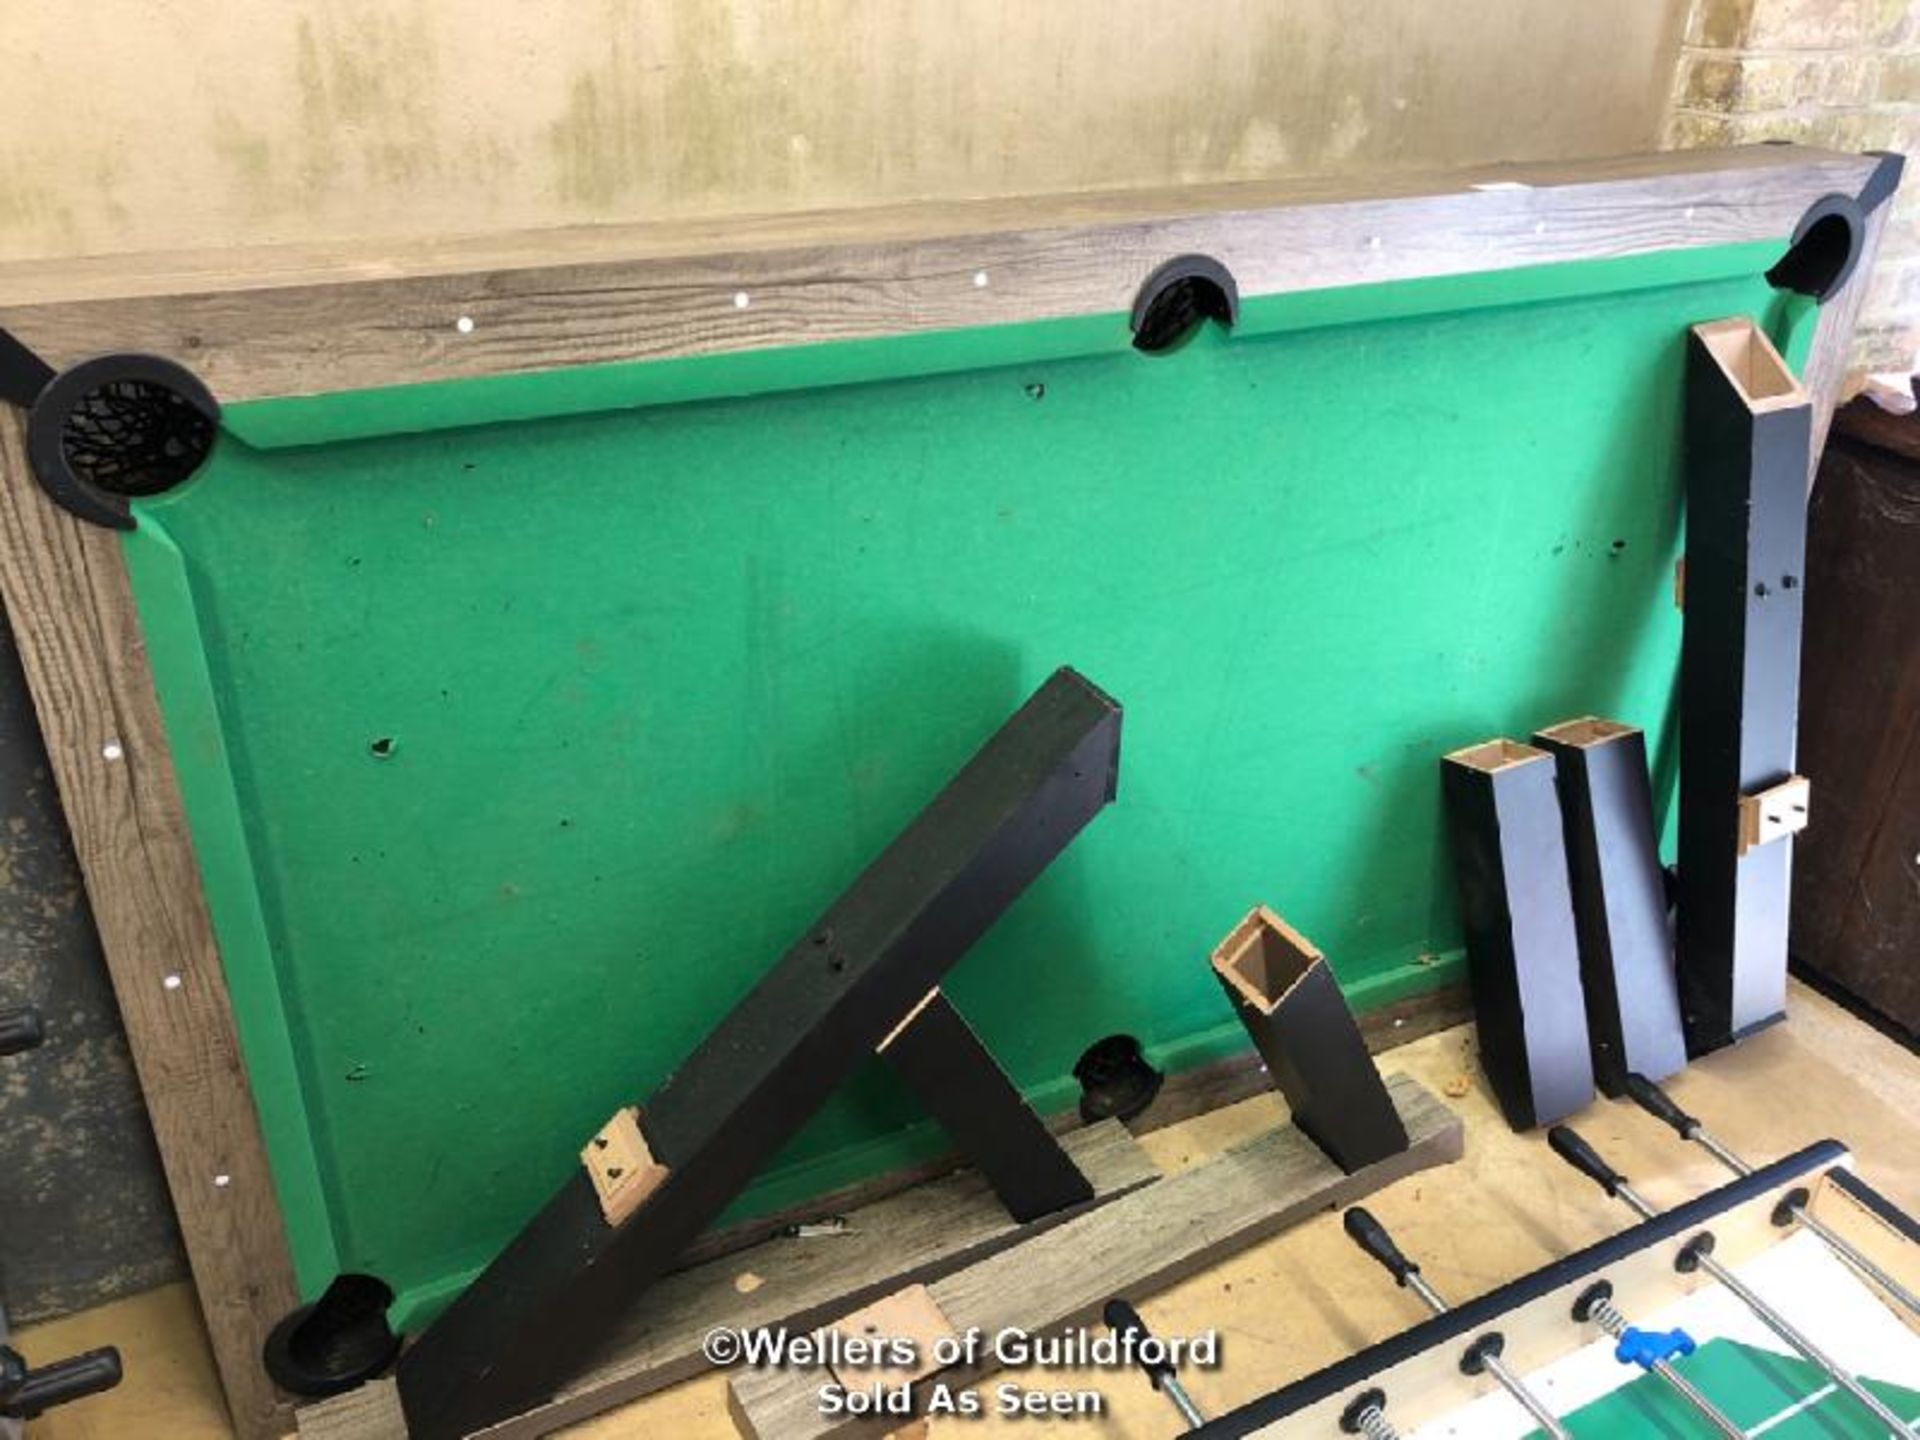 *POOL TABLE (DISMANTLED) WITH LEGS, LEGS WILL REQUIRE FIXING - 204CM L X 120CM W